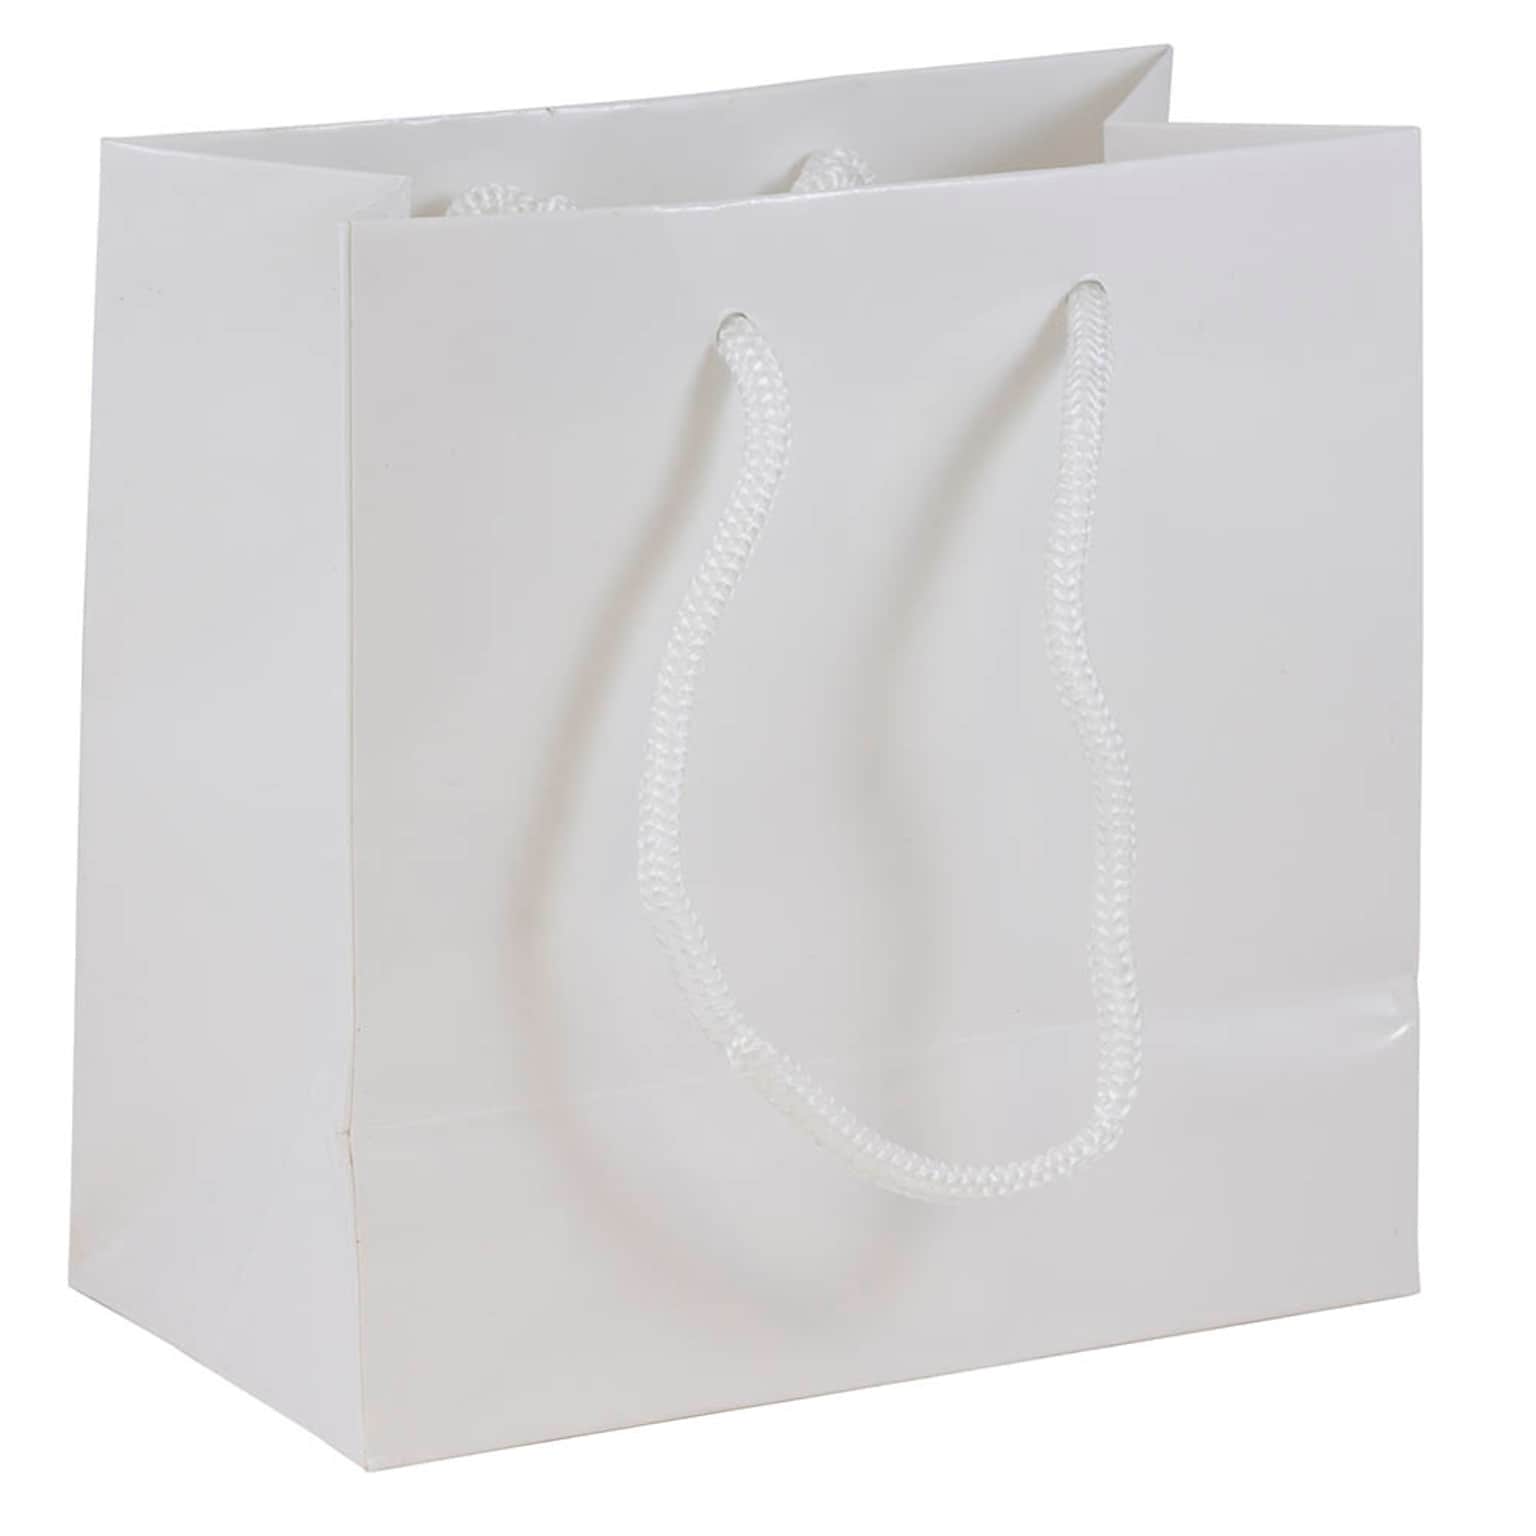 JAM PAPER Gift Bags with Rope Handles, Small Square, 6 1/2 x 6 1/2 x 3 1/2, White Glossy, 3/Pack (896GLWHA)